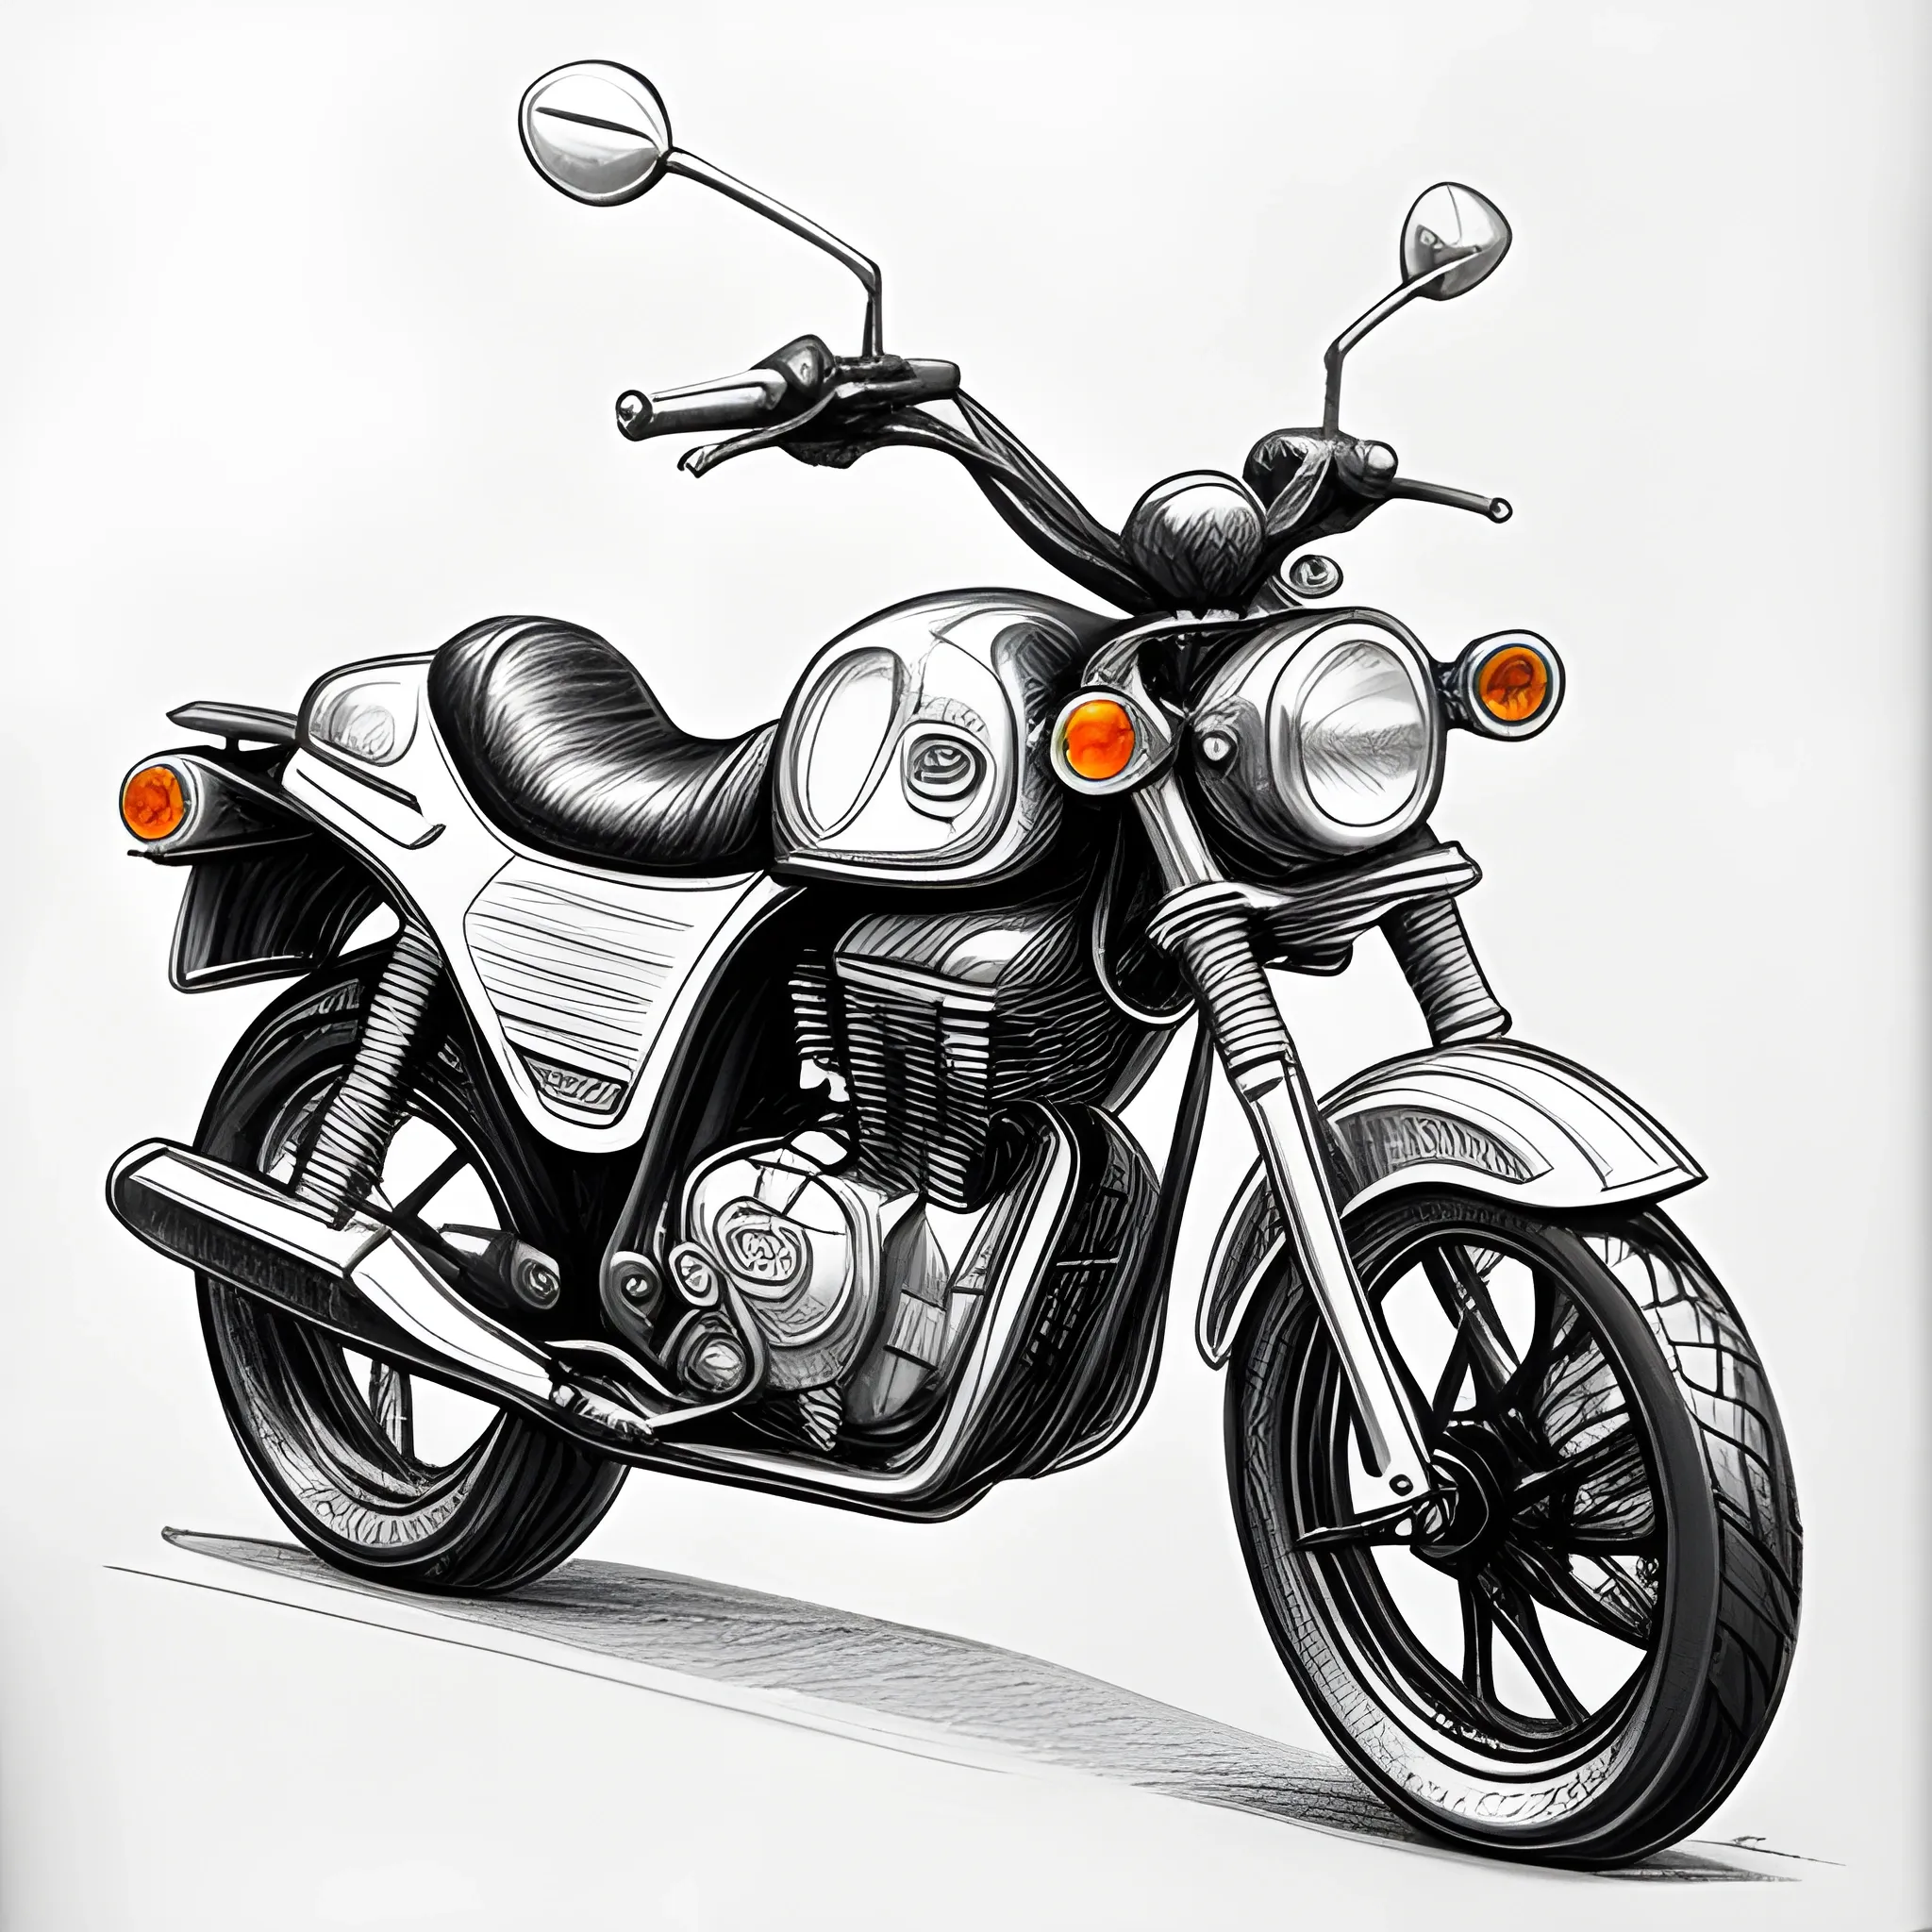 Little tough guy from India - Royal Enfield Himalayan. Drawn by me : r/ motorcycle